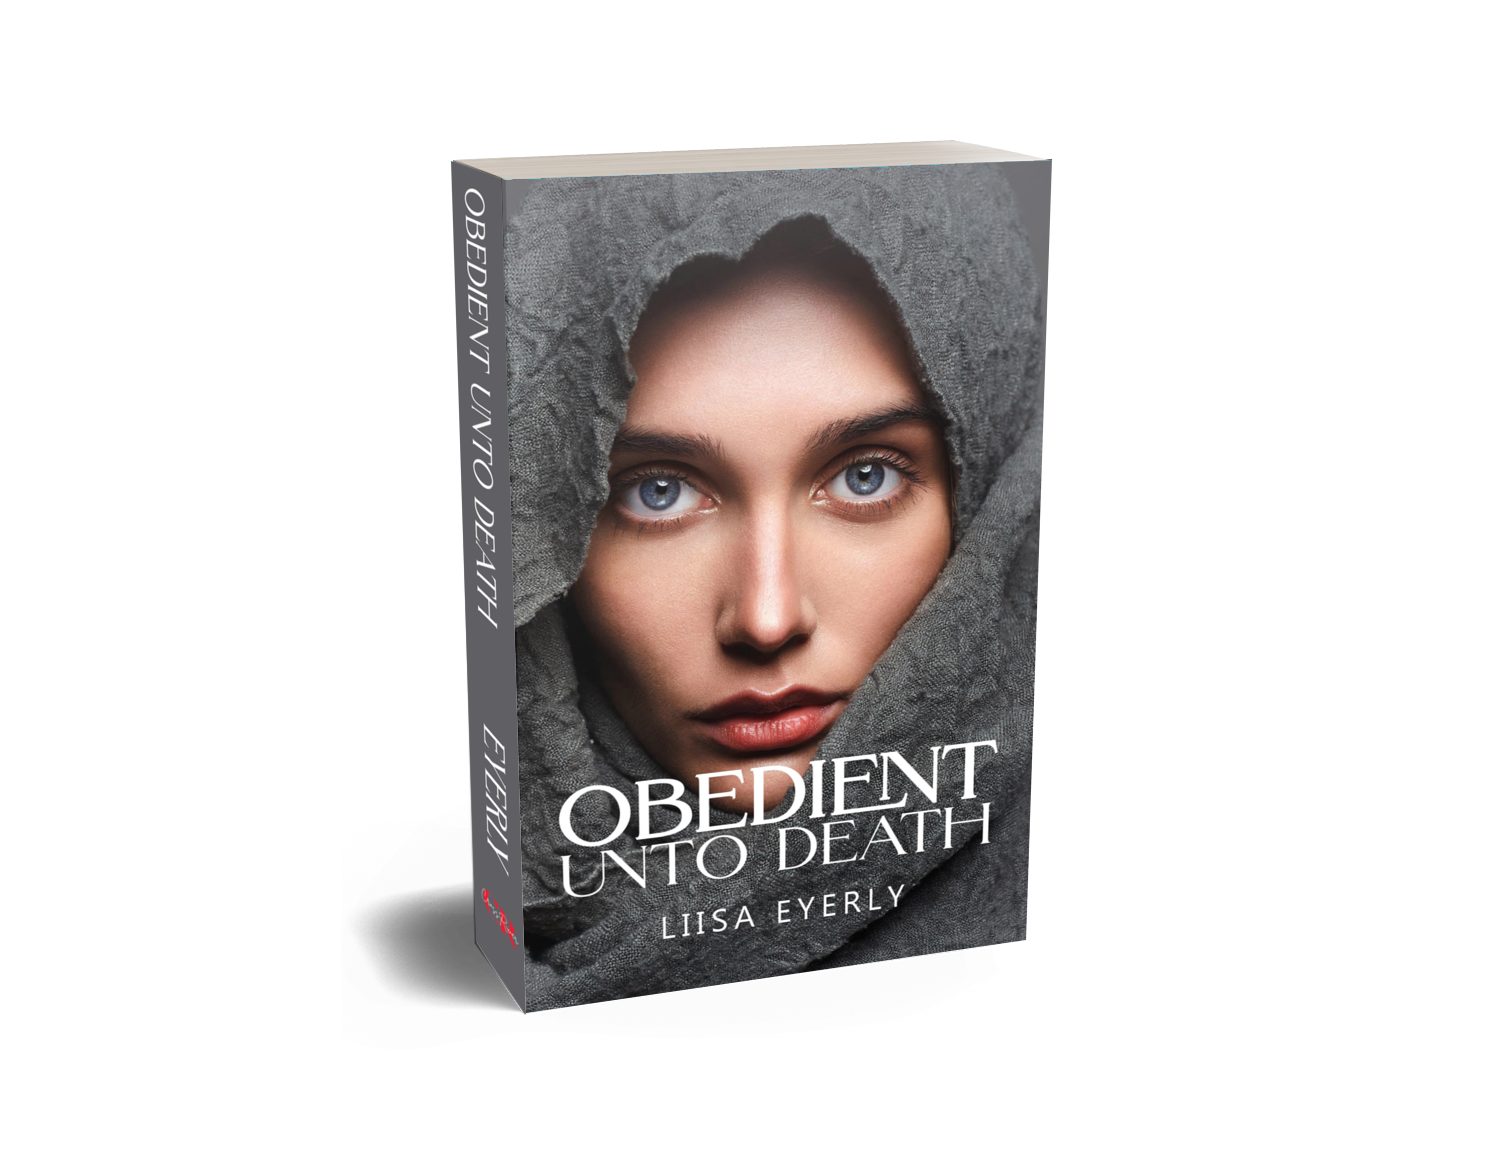 Obedient Unto Death by Liisa Eyerly from Christian publisher CrossRiver Media